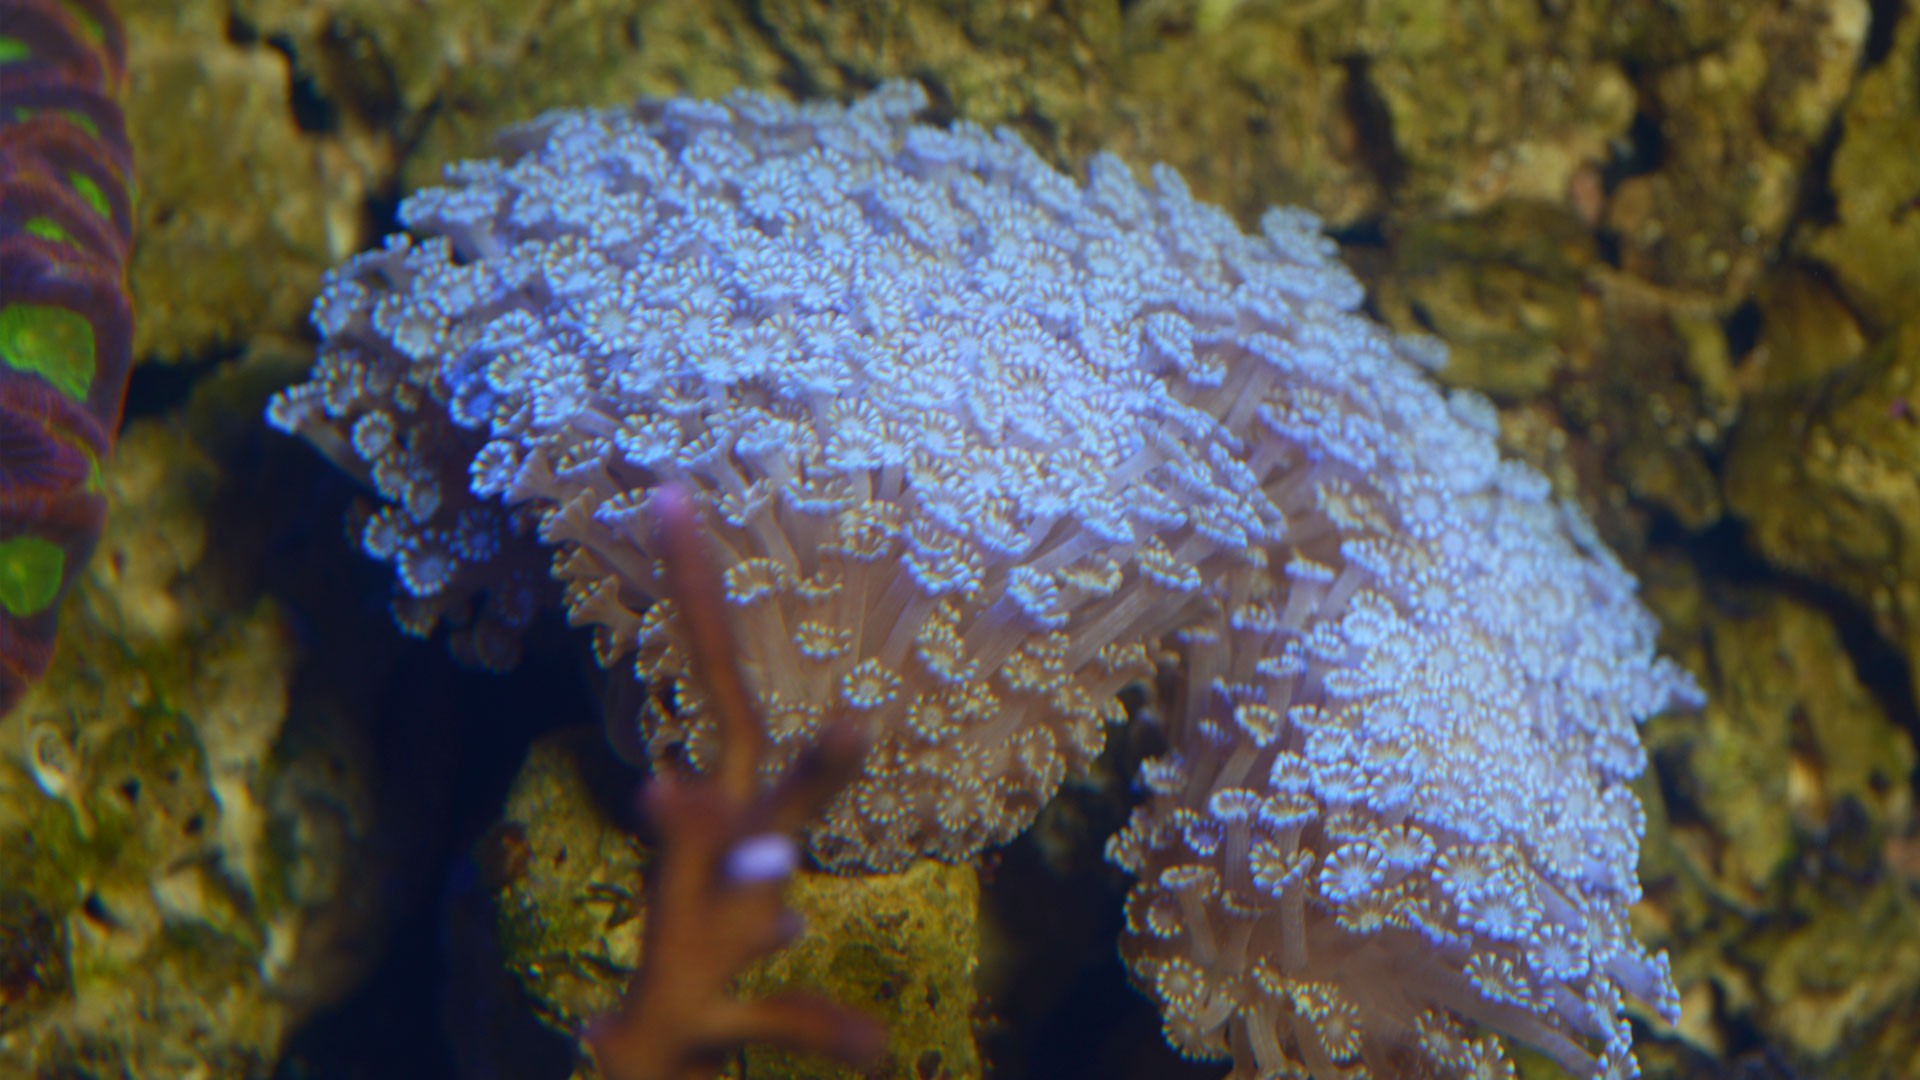 Coral reef polyps